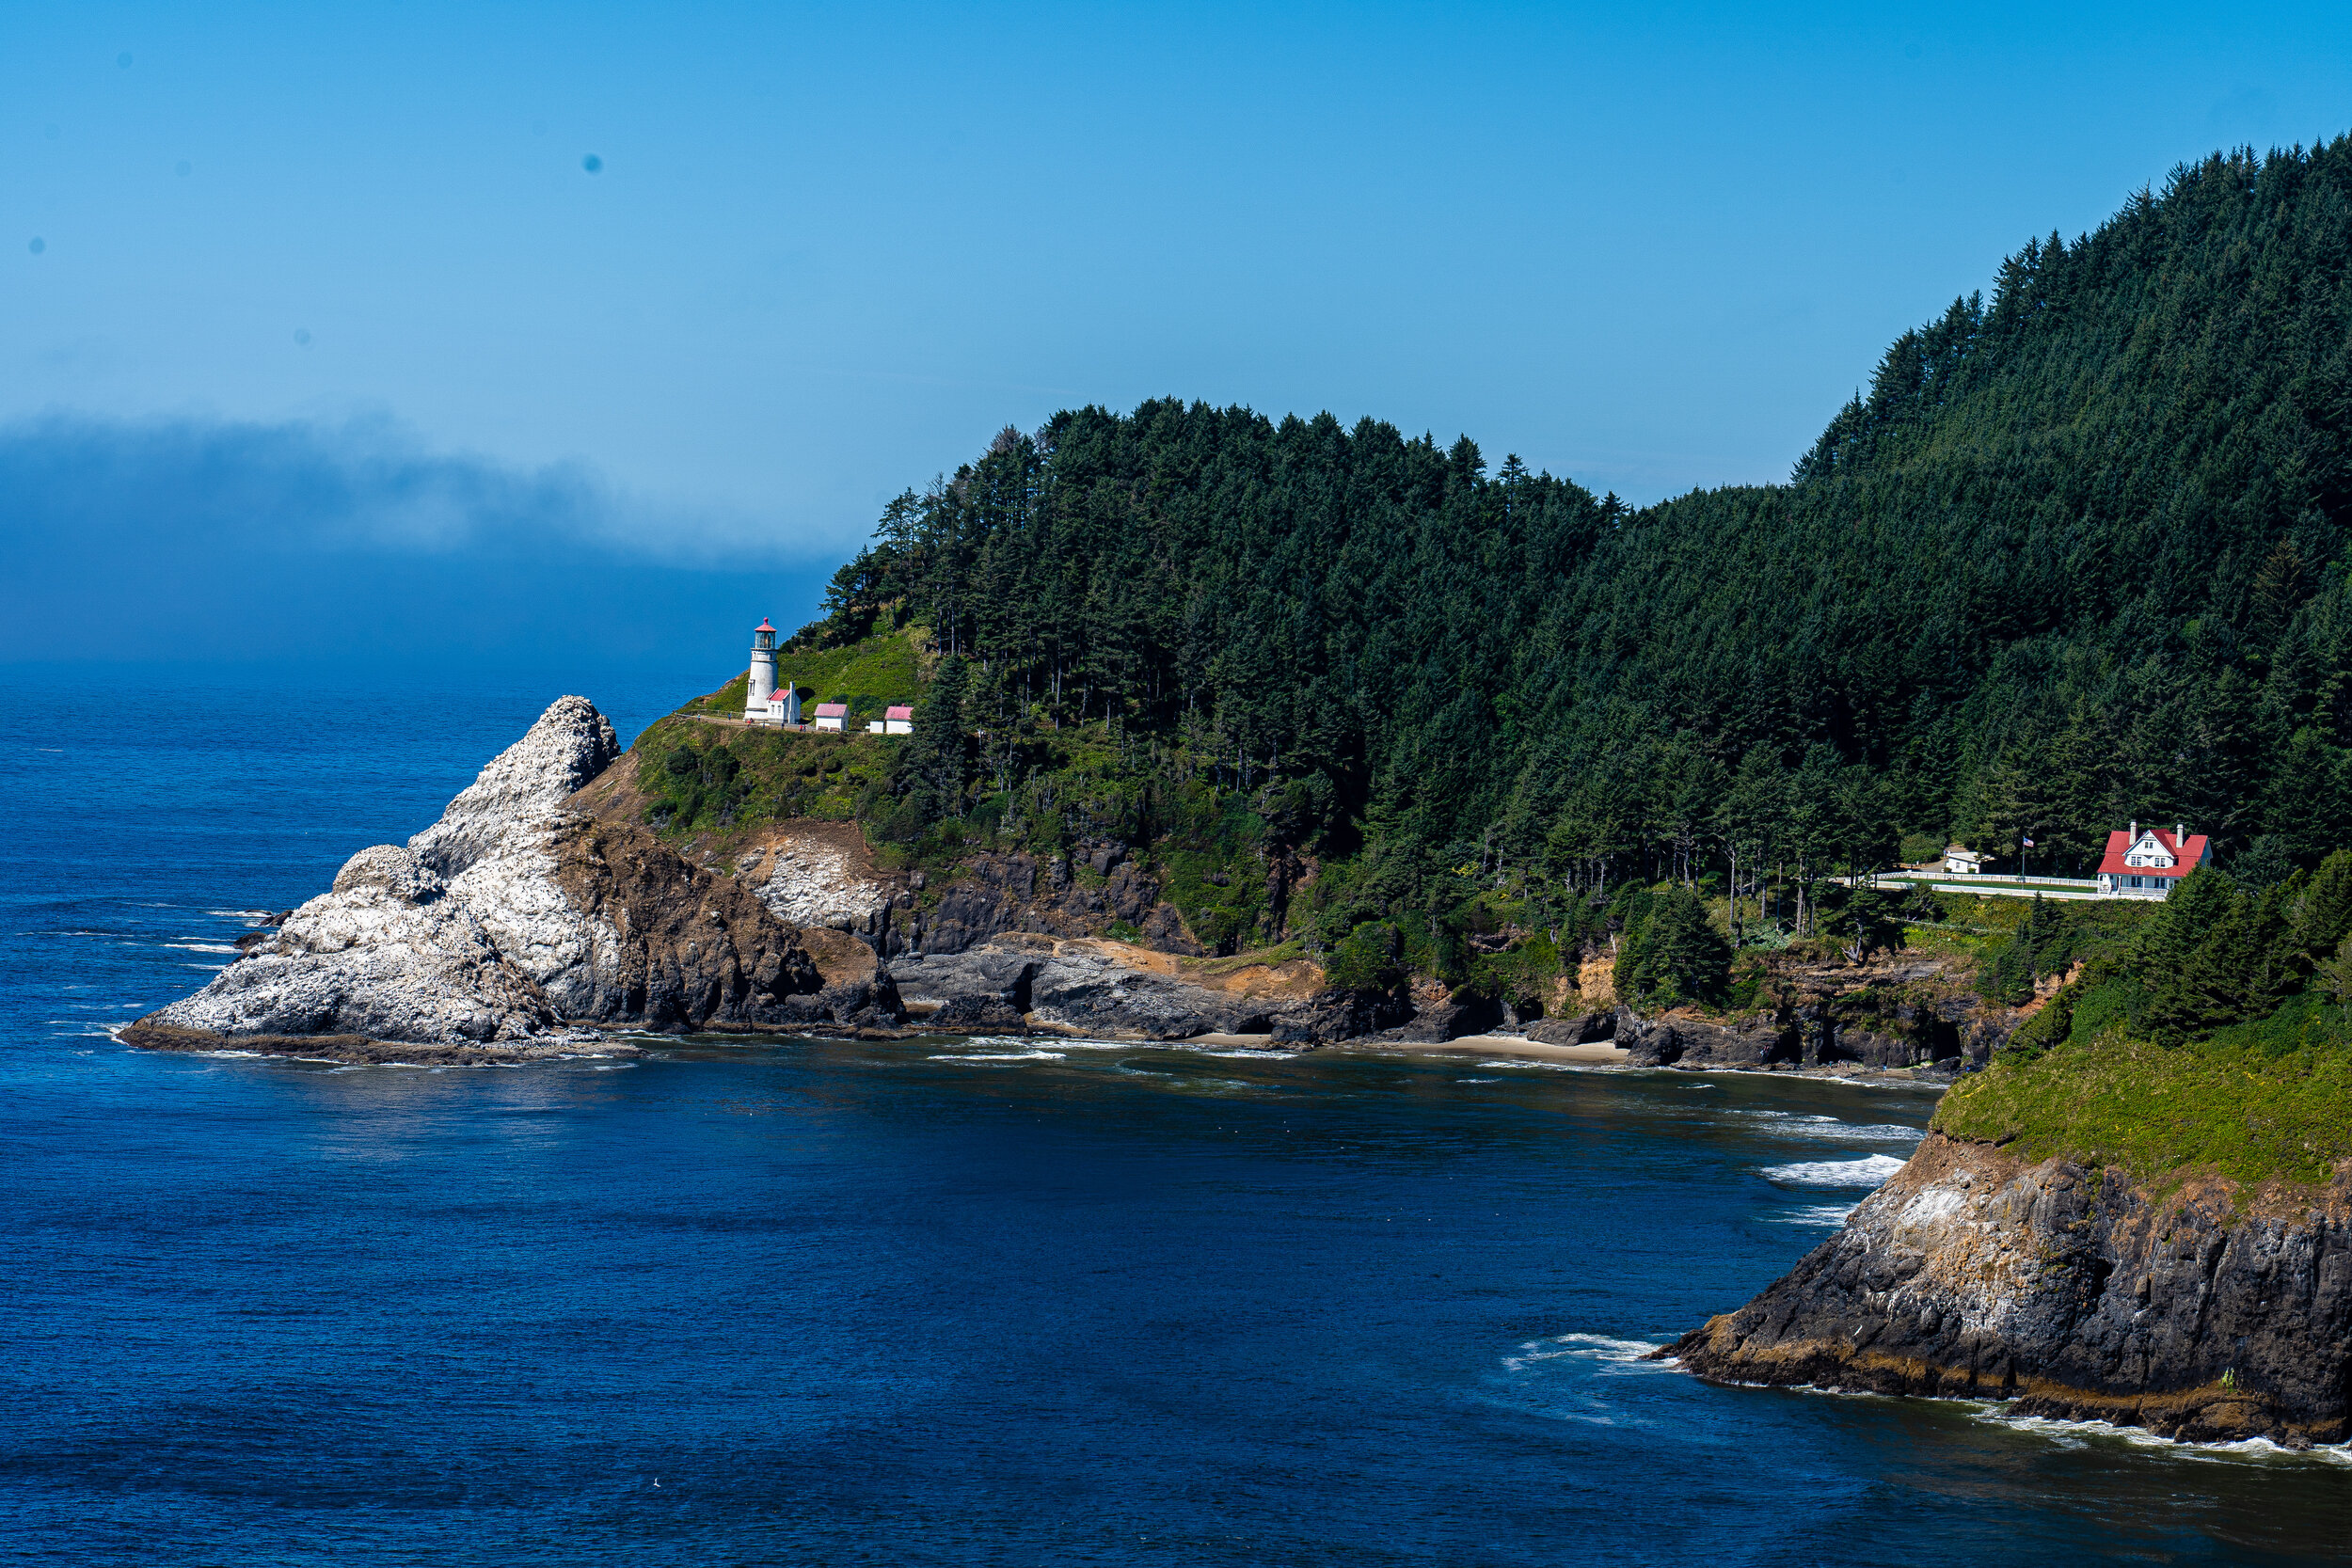  While at Sea Lion Caves, Craig photographed  Heceta Head Lighthouse . Heceta goes on record as being the brightest lighthouse in Oregon, and is now also used as a Bed and Breakfast. 